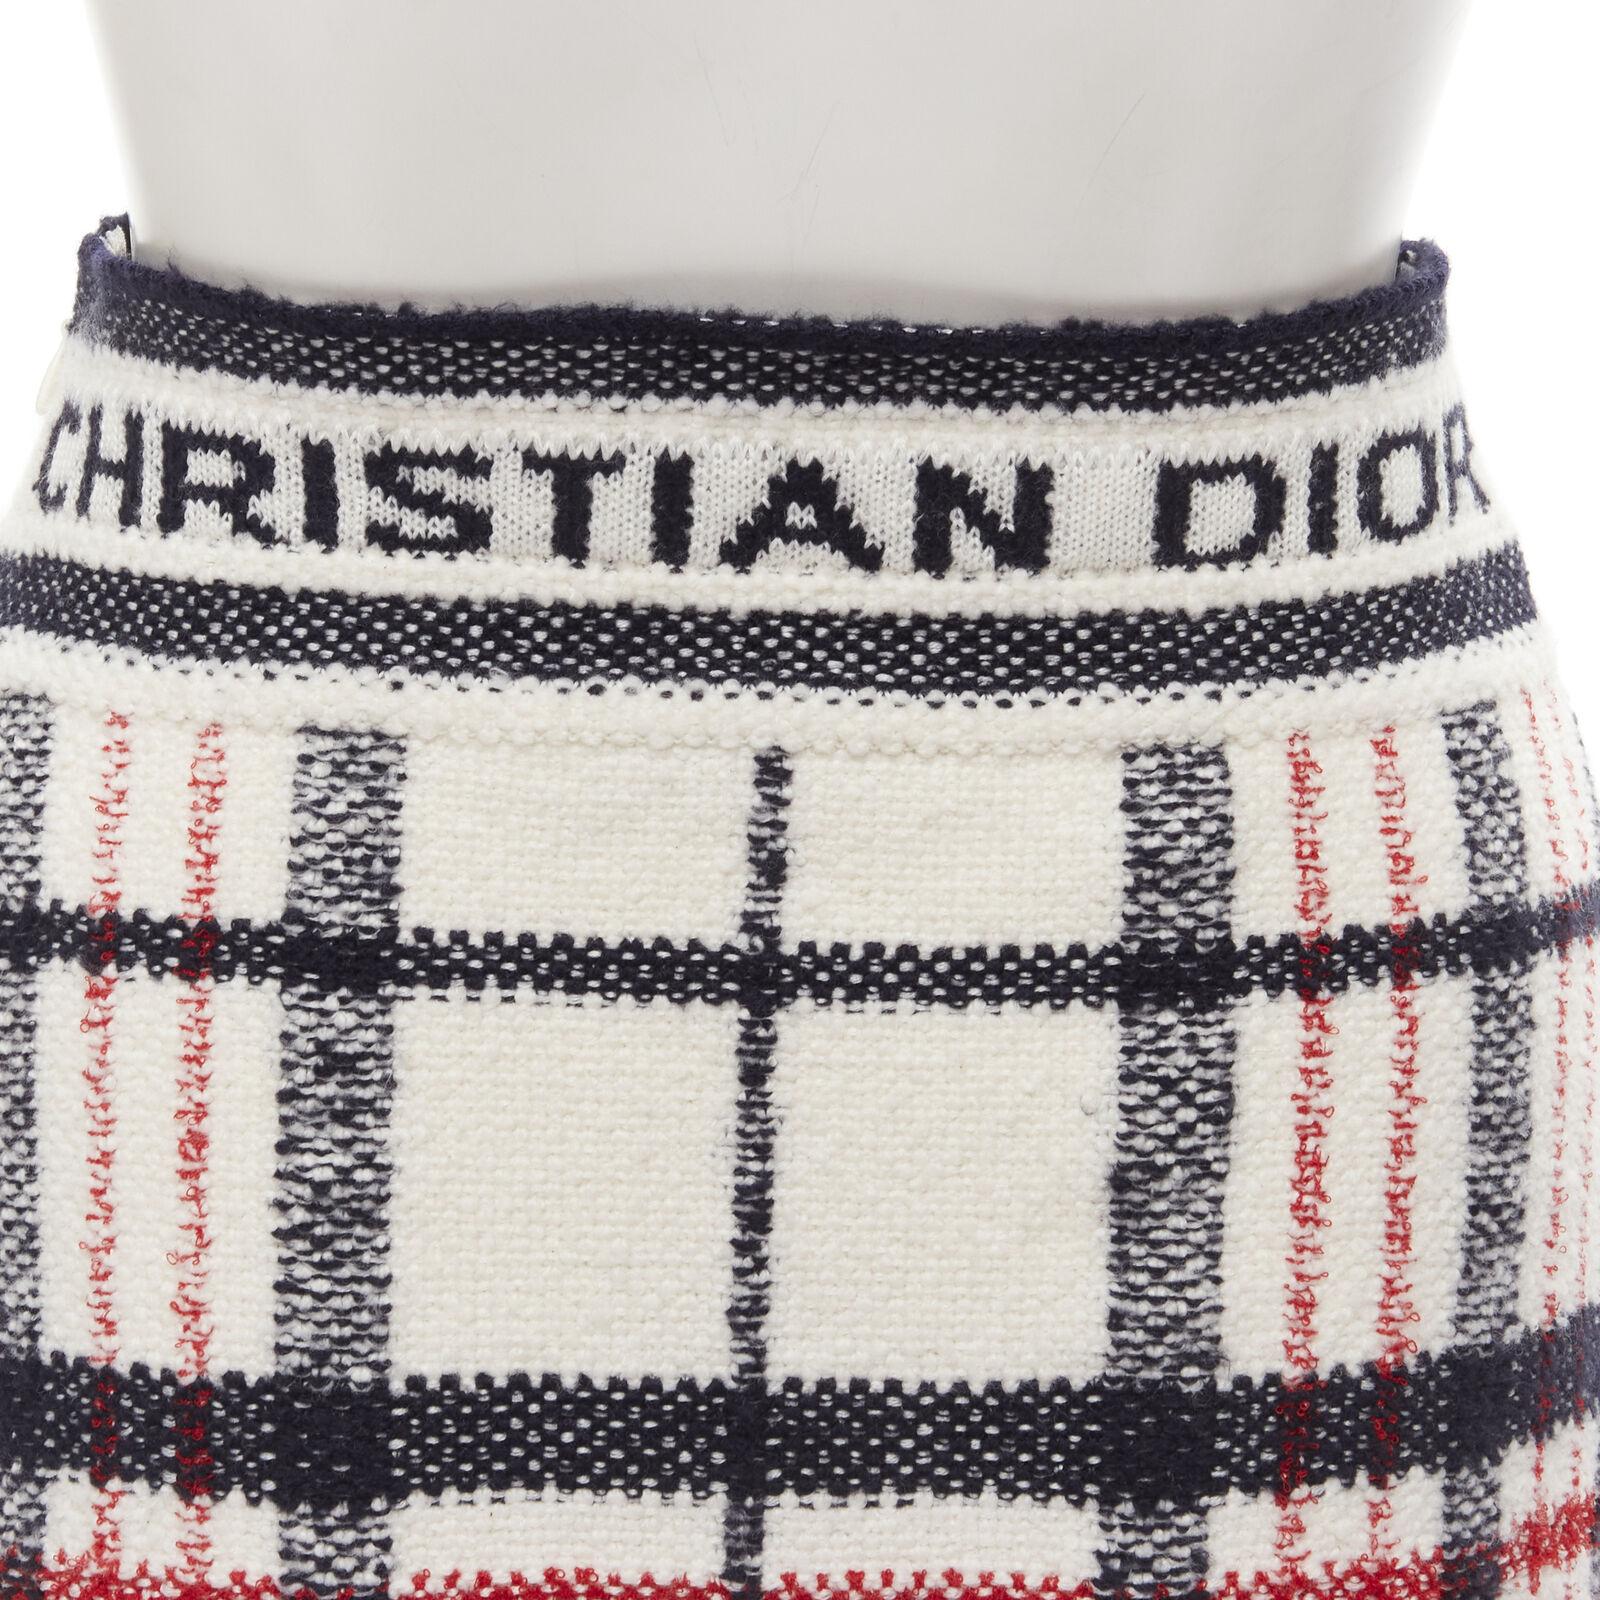 CHRISTIAN DIOR 2022 CD logo red plaid checked boucle preppy mini skirt FR34 XS
Reference: AAWC/A00365
Brand: Christian Dior
Designer: Maria Grazia Chiuri
Collection: 2022
Material: Cotton, Virgin Wool
Color: Multicolour
Pattern: Plaid
Closure: